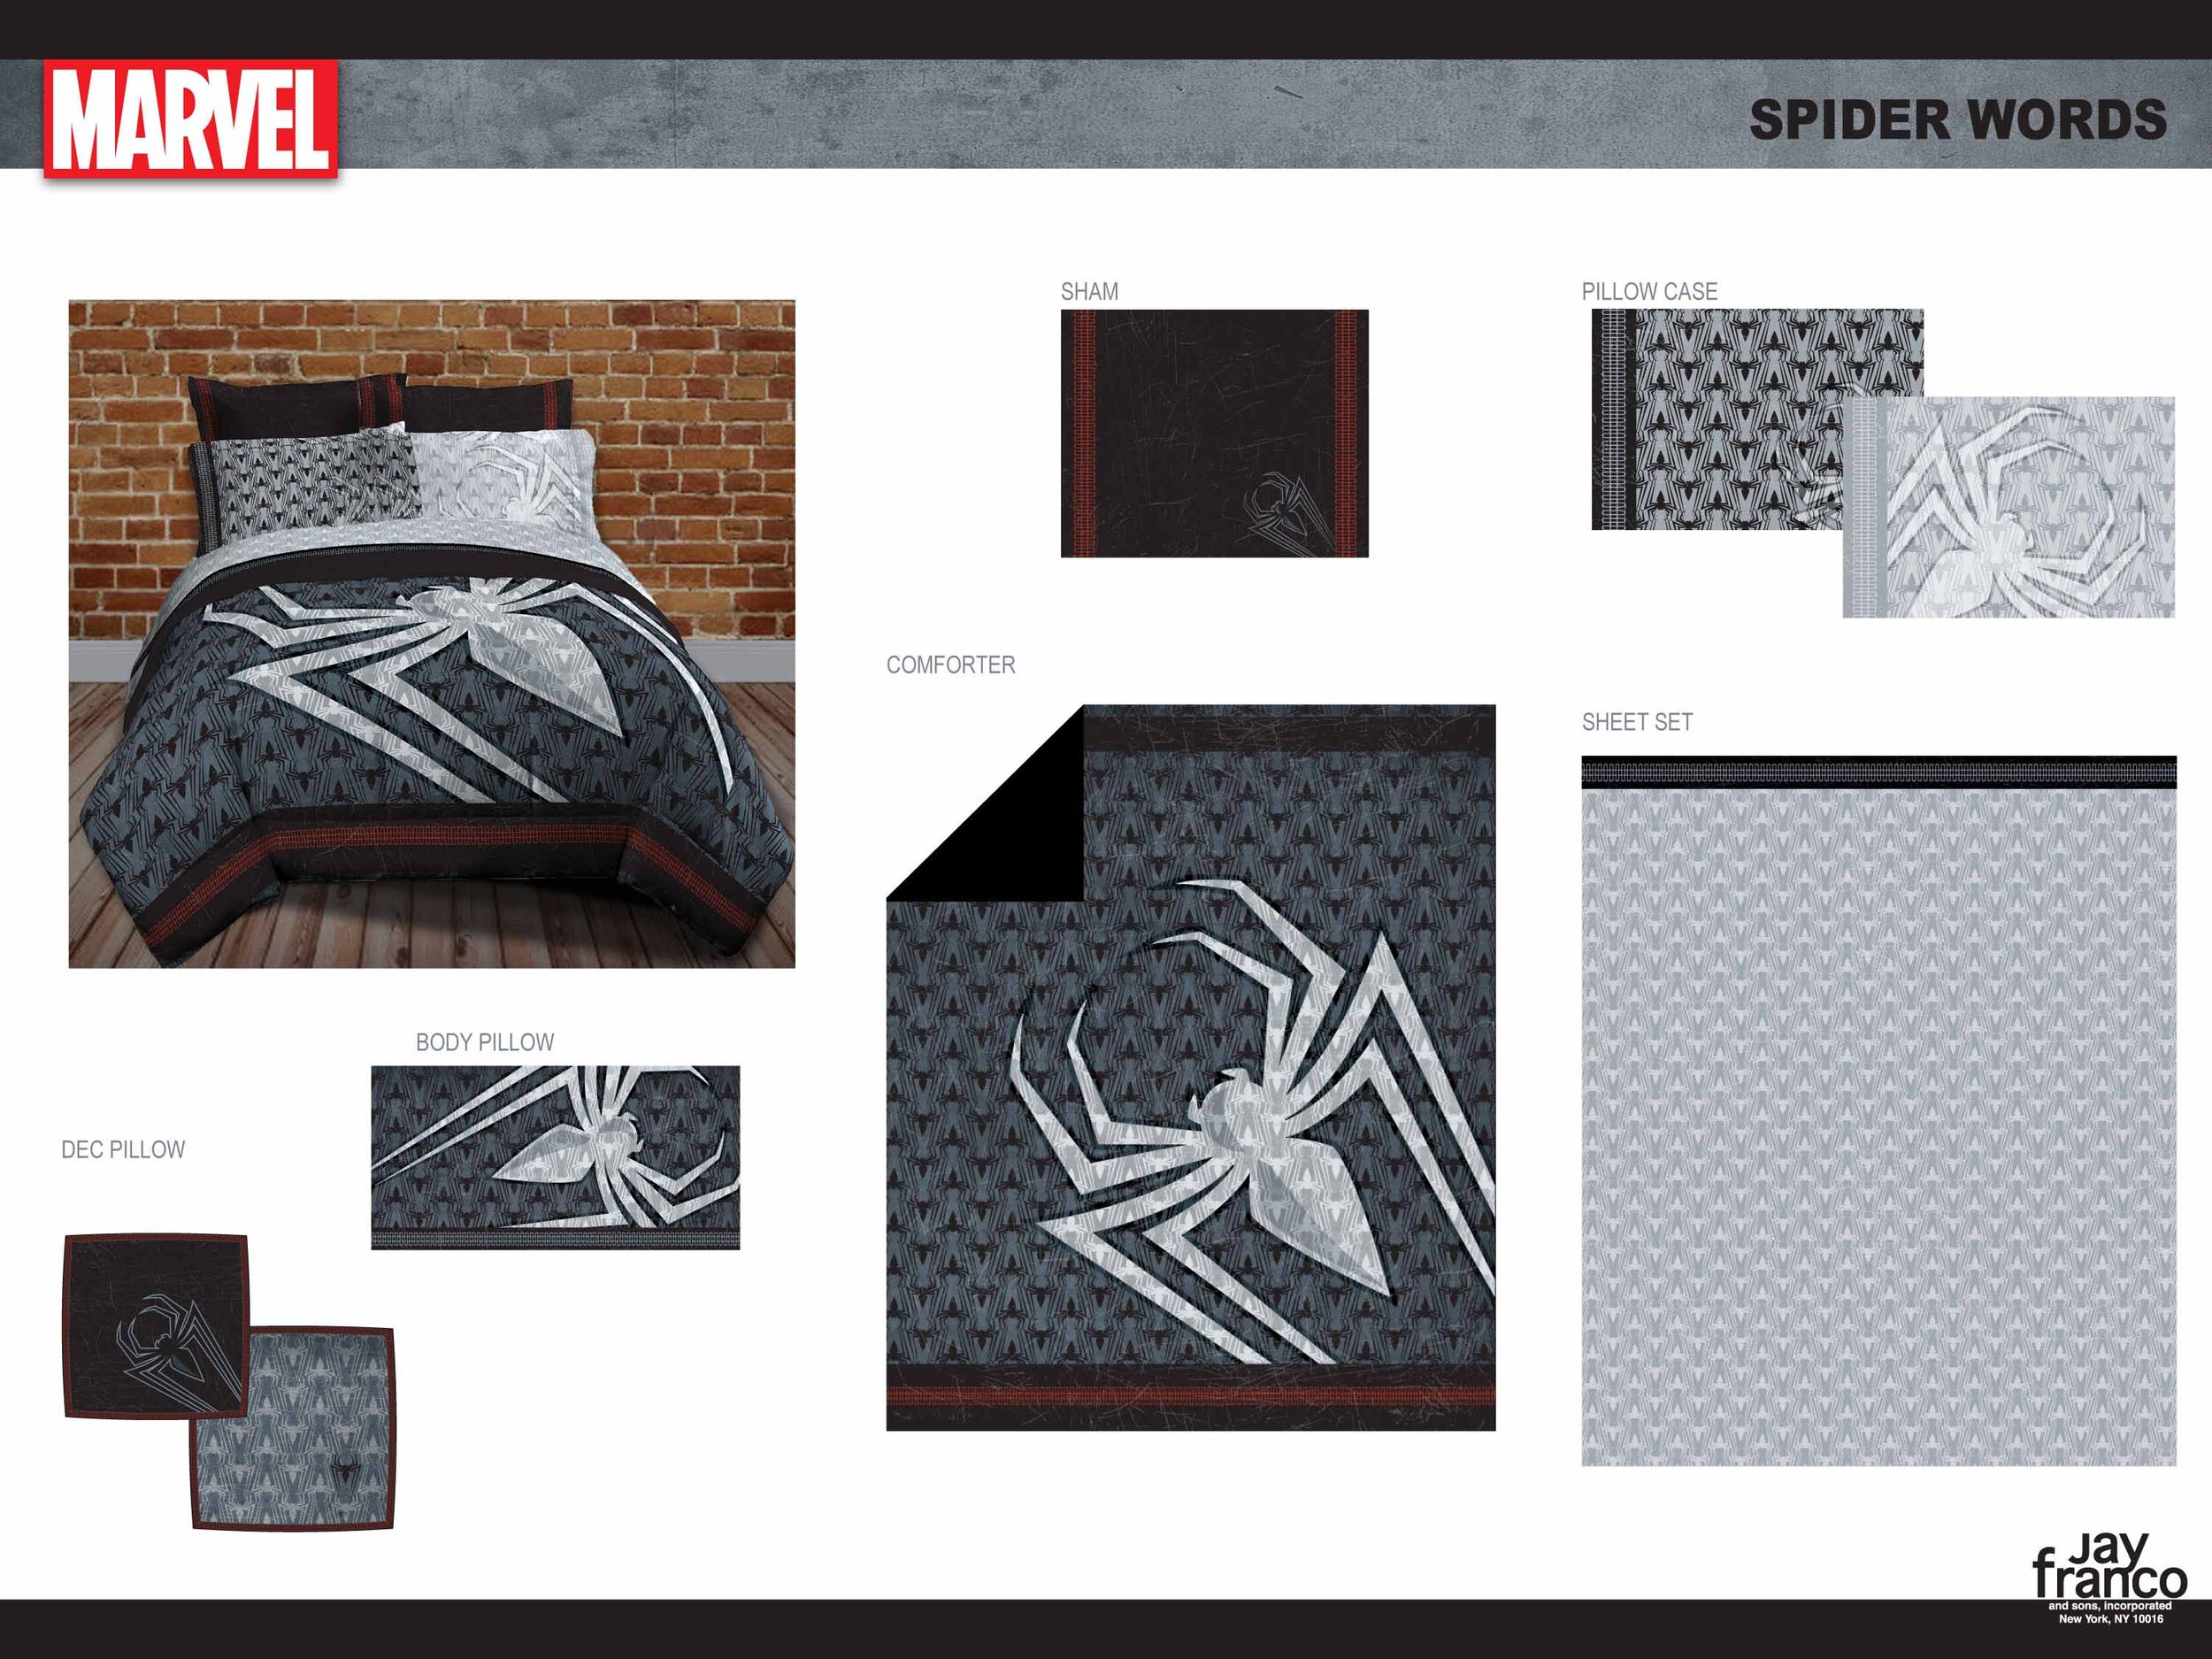 Jay Franco & Sons Marvel Spidey and His Amazing Friends Team Spidey Twin Size Sheet Set - 3 Piece Set Super Soft and Cozy KidAs Bedding - Fade Res